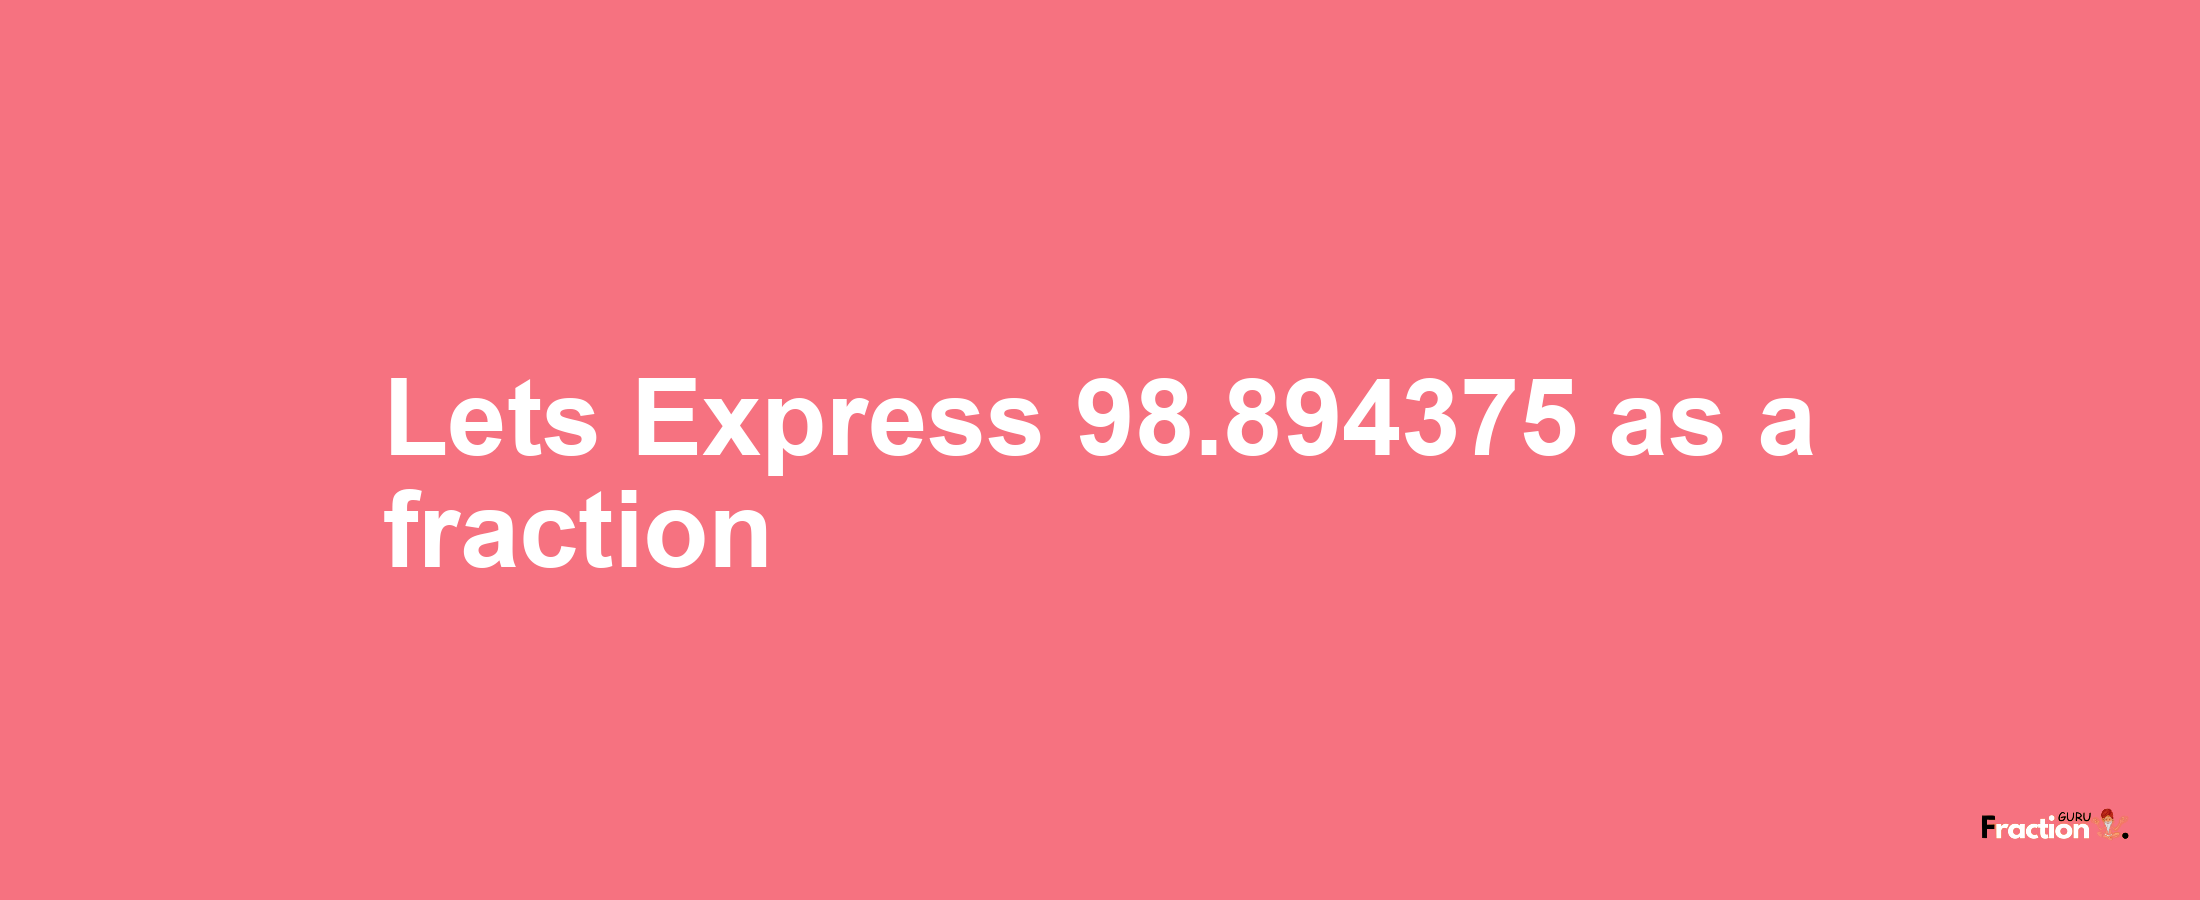 Lets Express 98.894375 as afraction